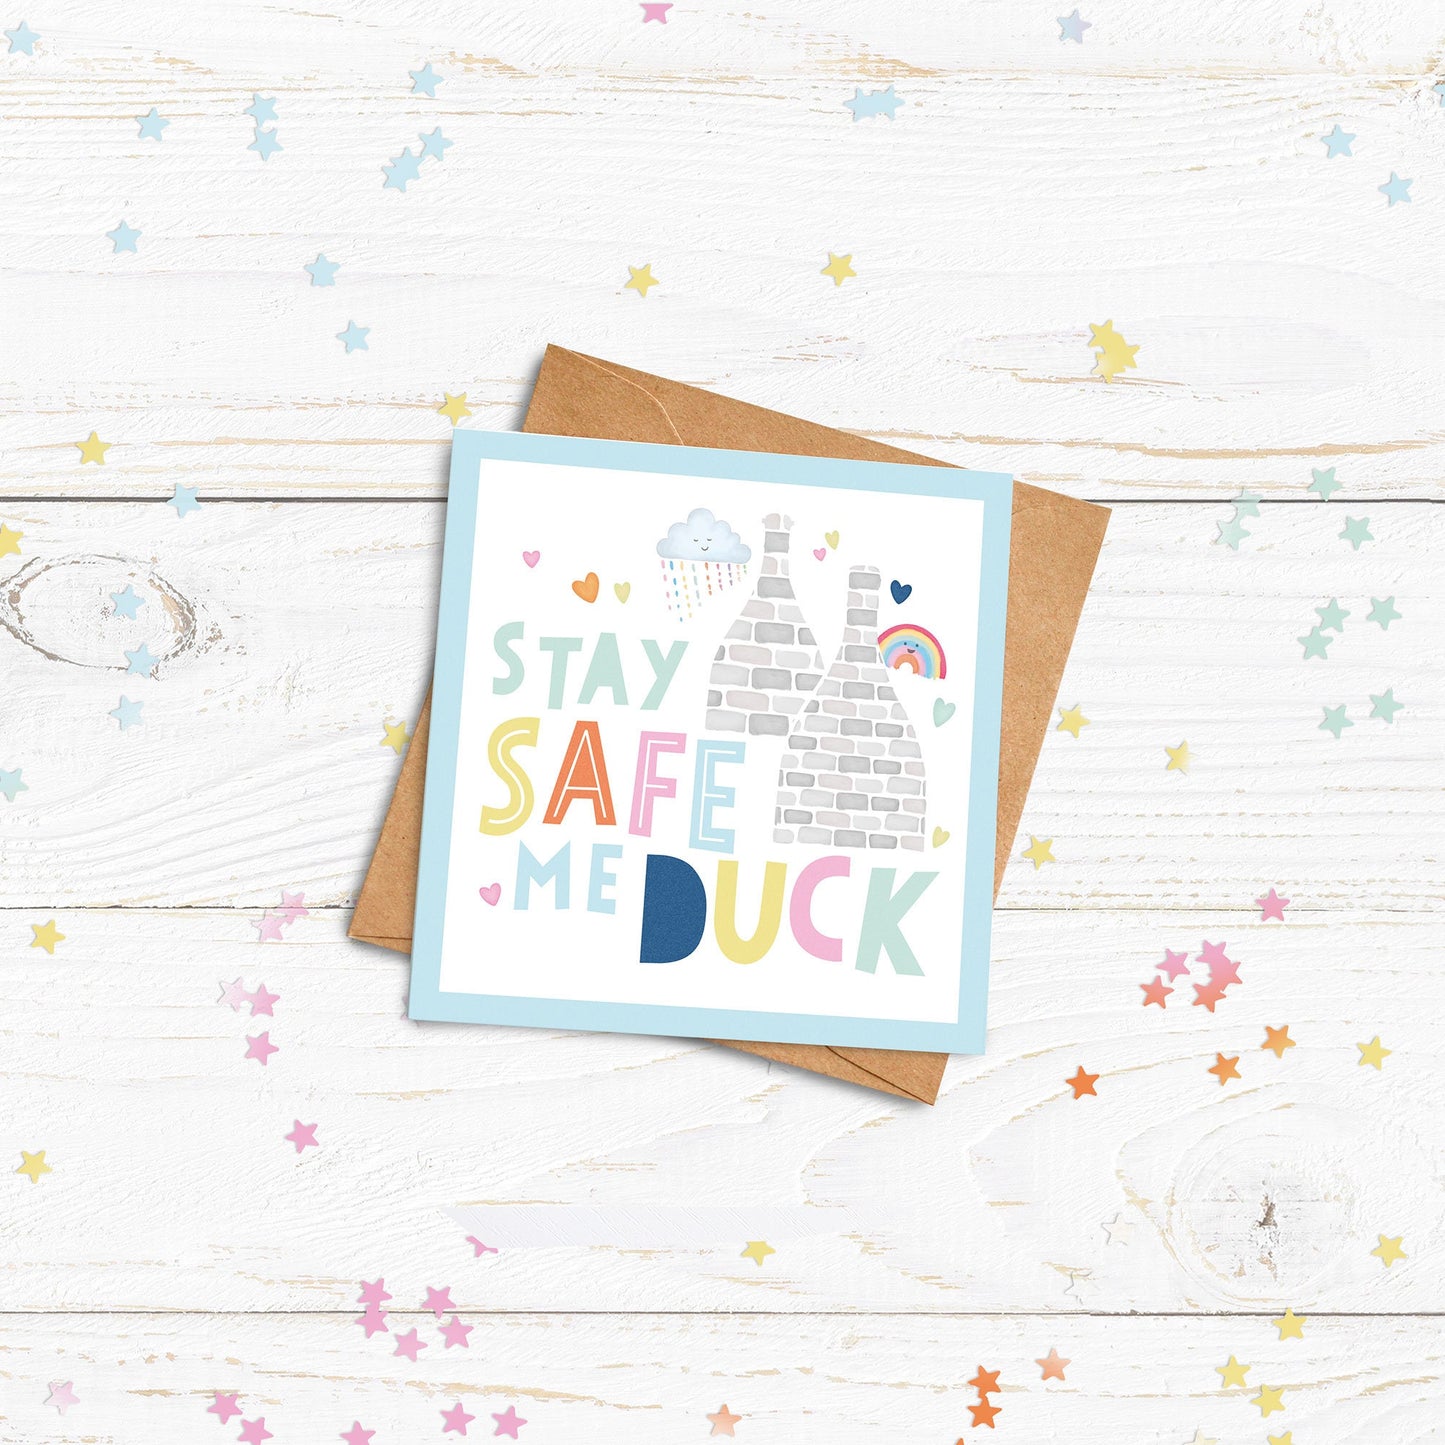 Mini Pack of Happiness - Stay Safe Me Duck Cards. Lockdown Cards.